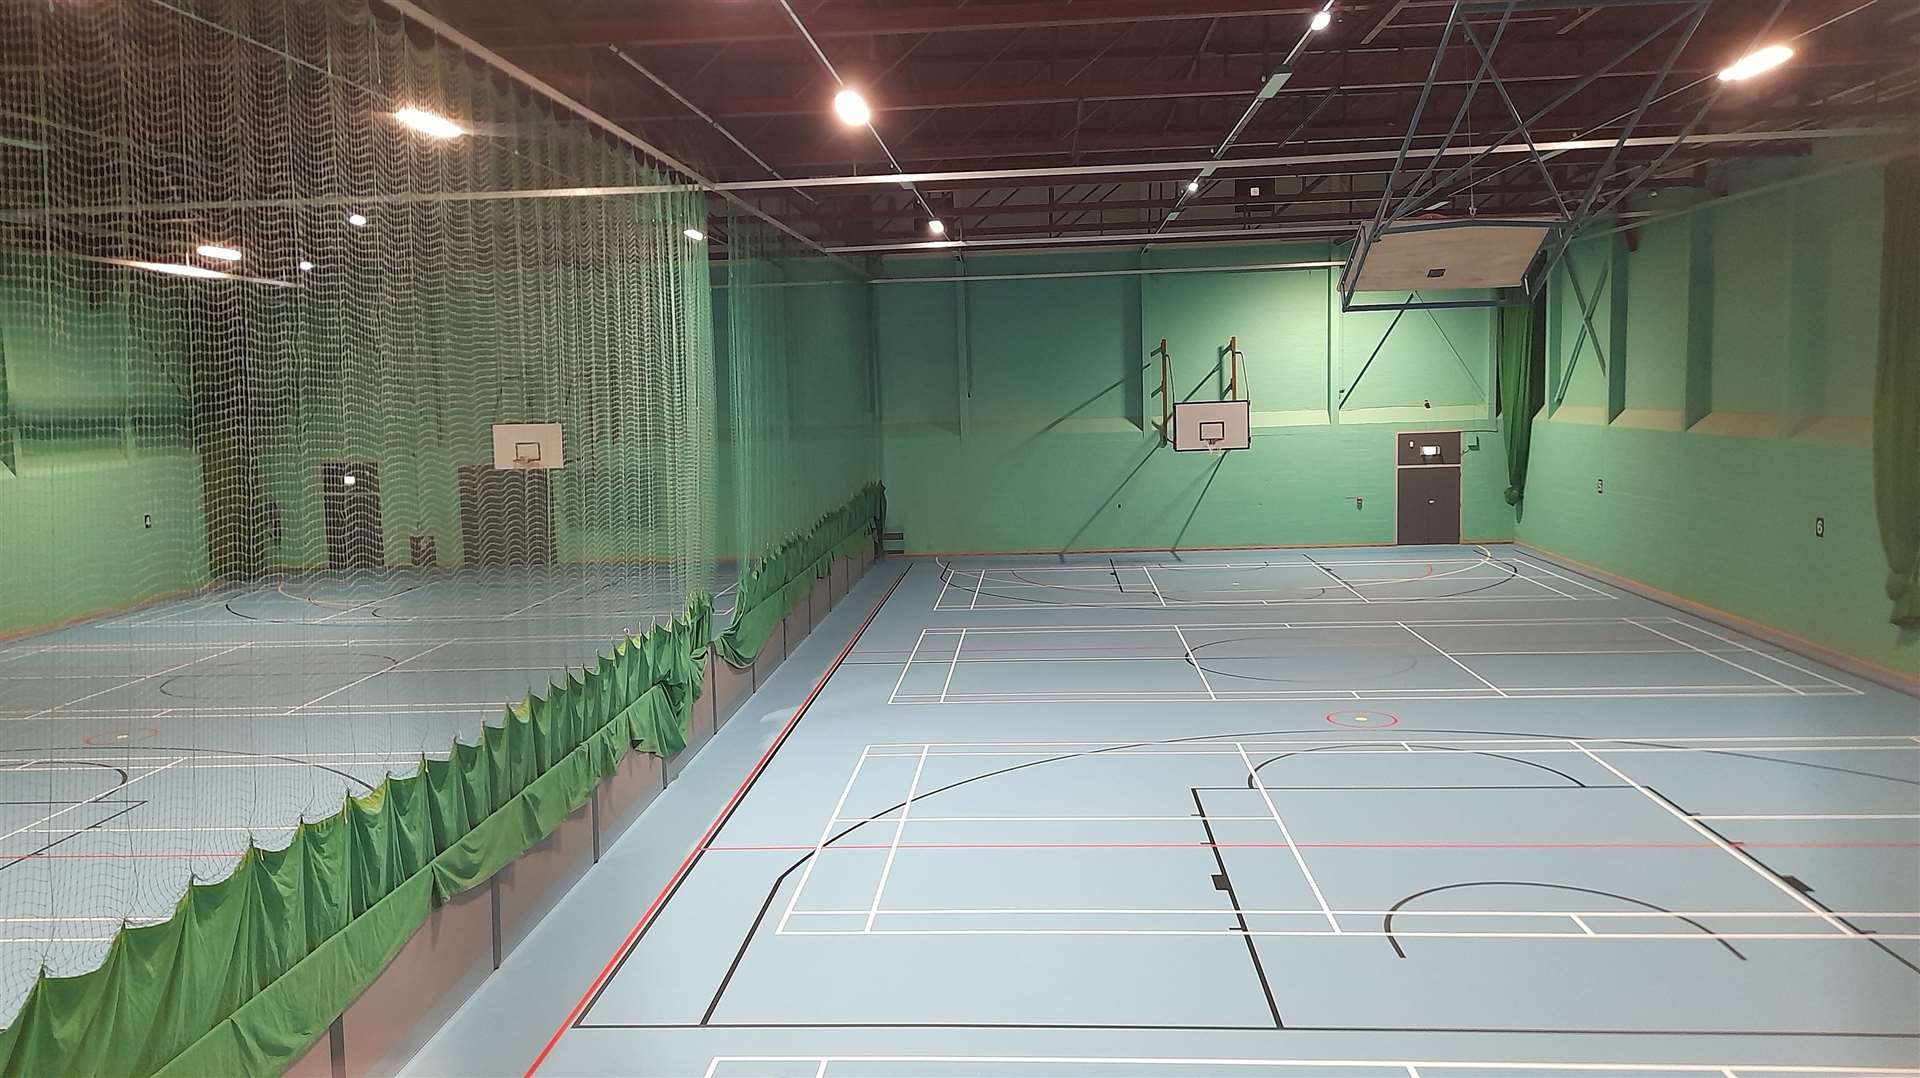 The sports hall is looking much more modern than it previously did